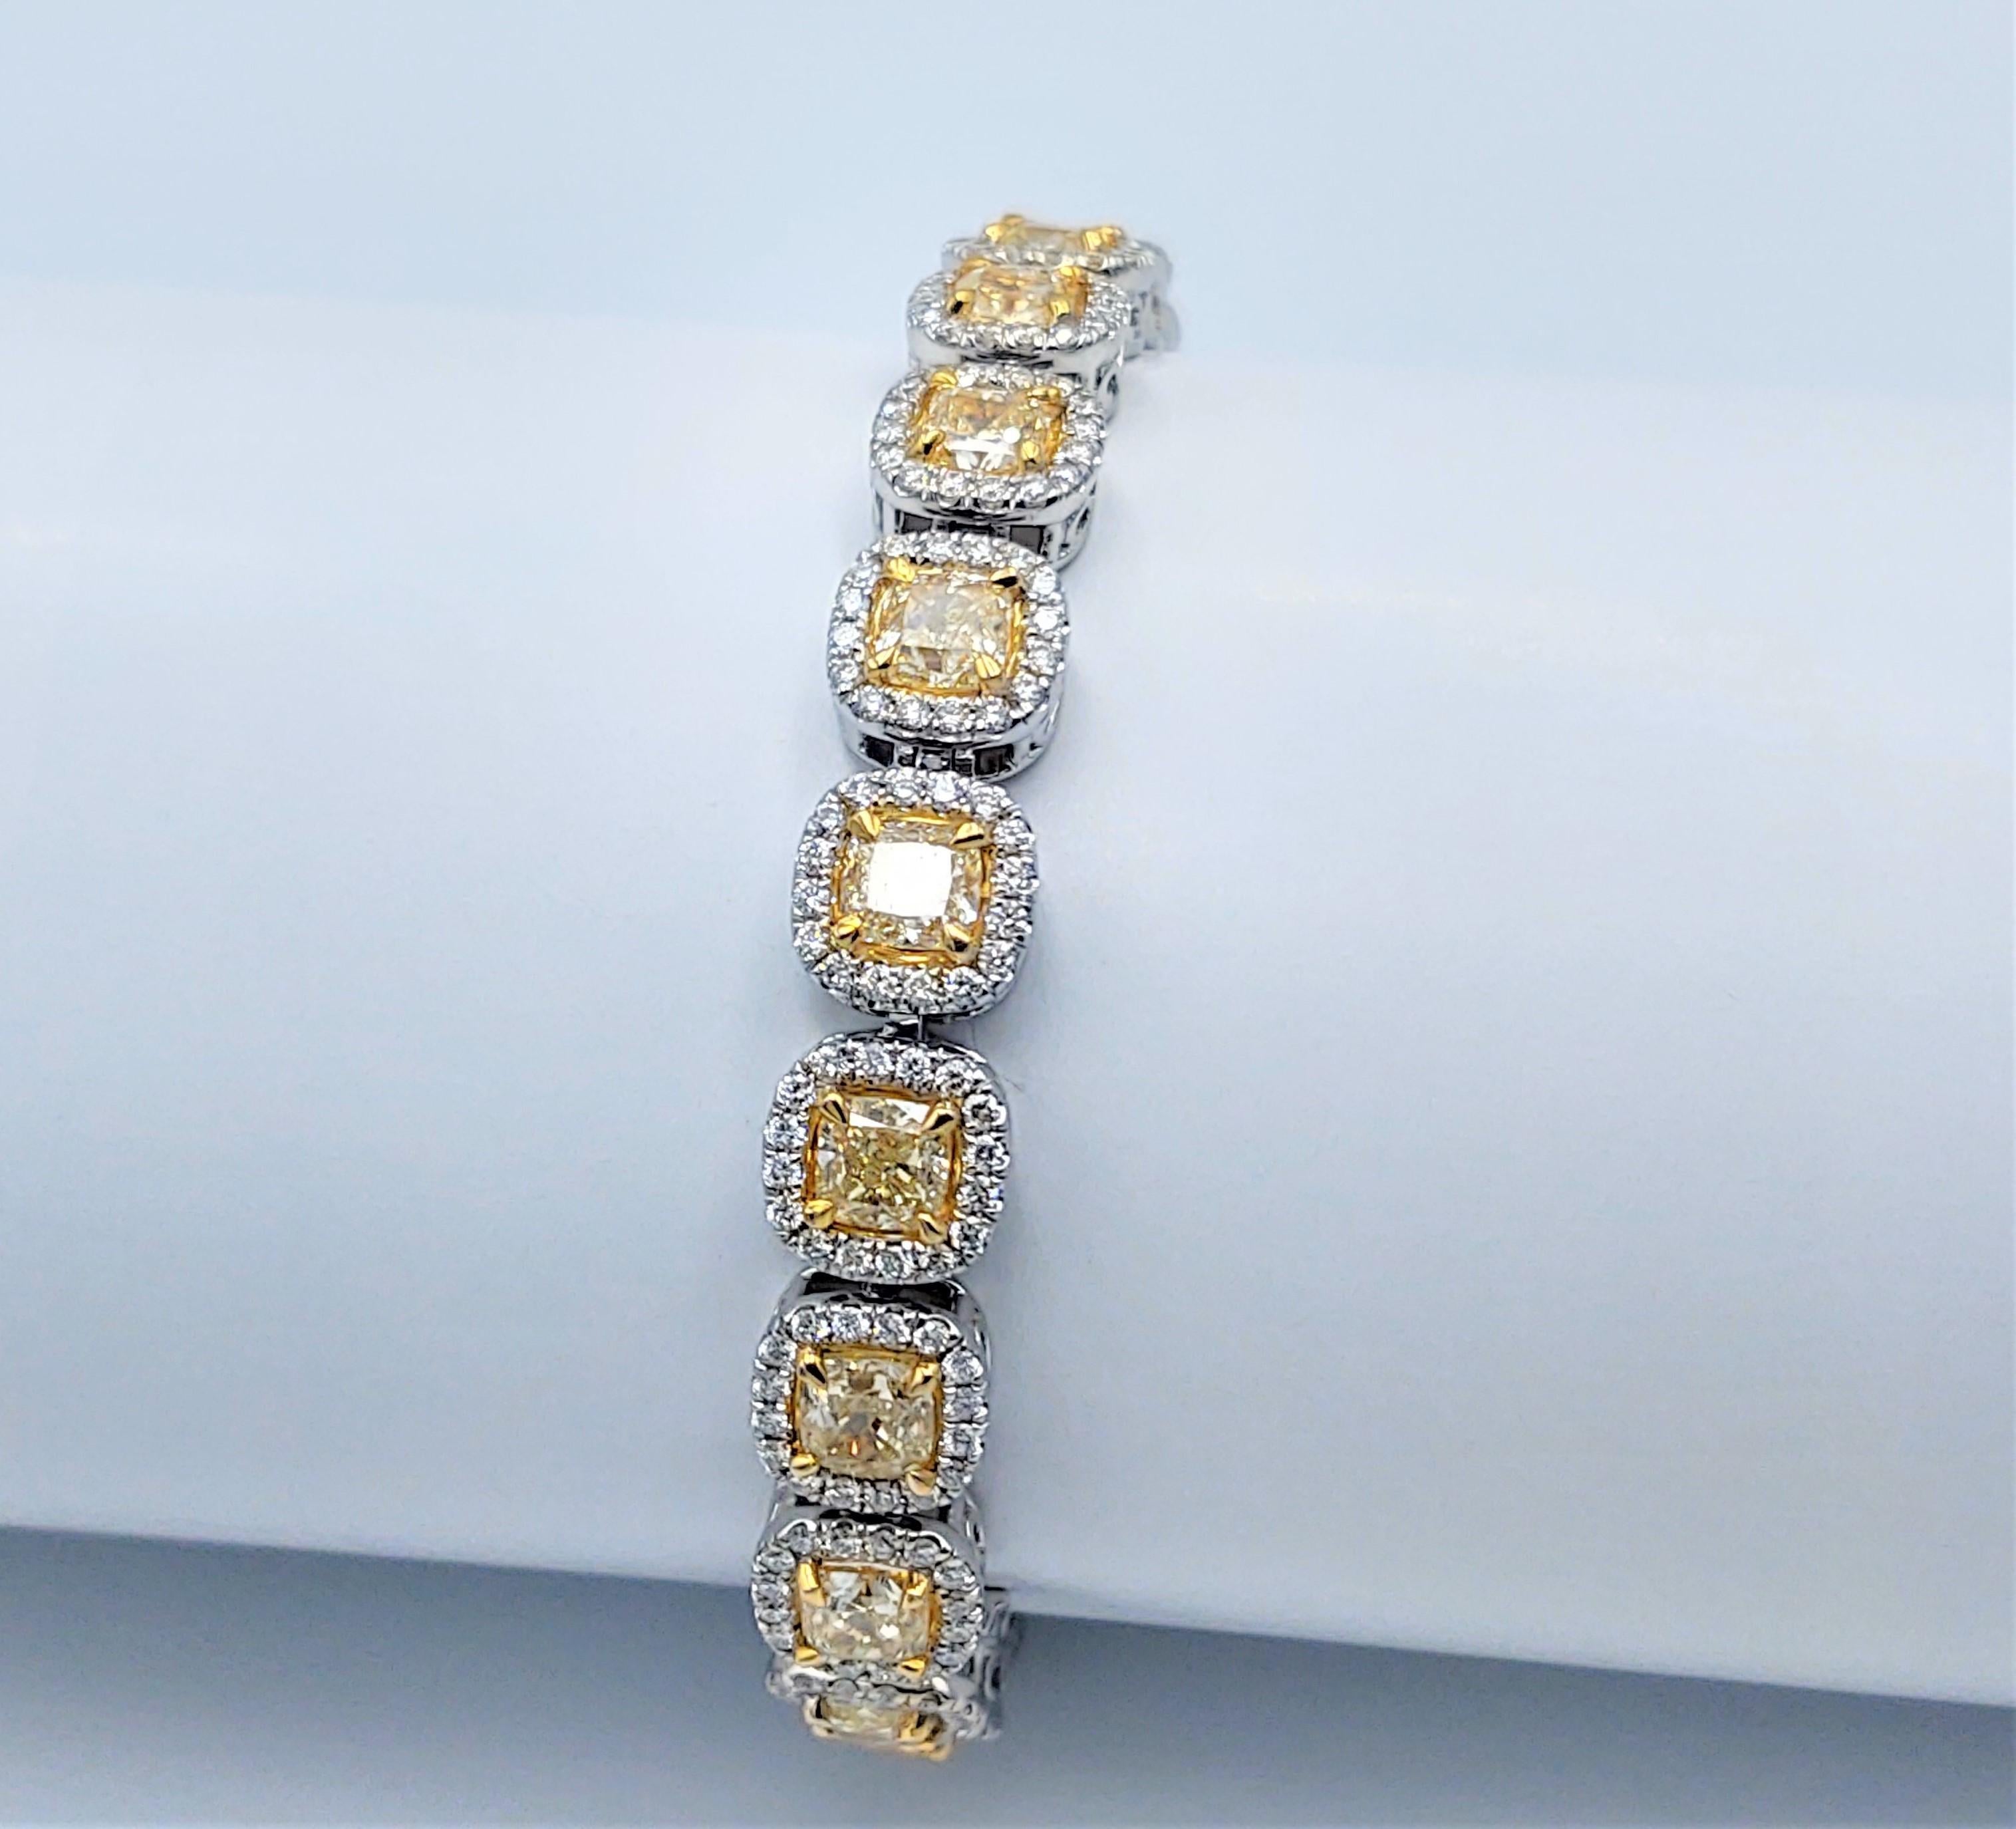 18K  White gold Fancy Yellow and White Diamond Tennis Bracelet  40.18 gr

Containing 20 Natural Fancy Yellow VS2+ Radiant  Cut Diamonds Weighing  14.60 cts. 

Each Stone Is Surrounded  By a Halo Consisting Of  320 White G+ SI + Round Brilliant